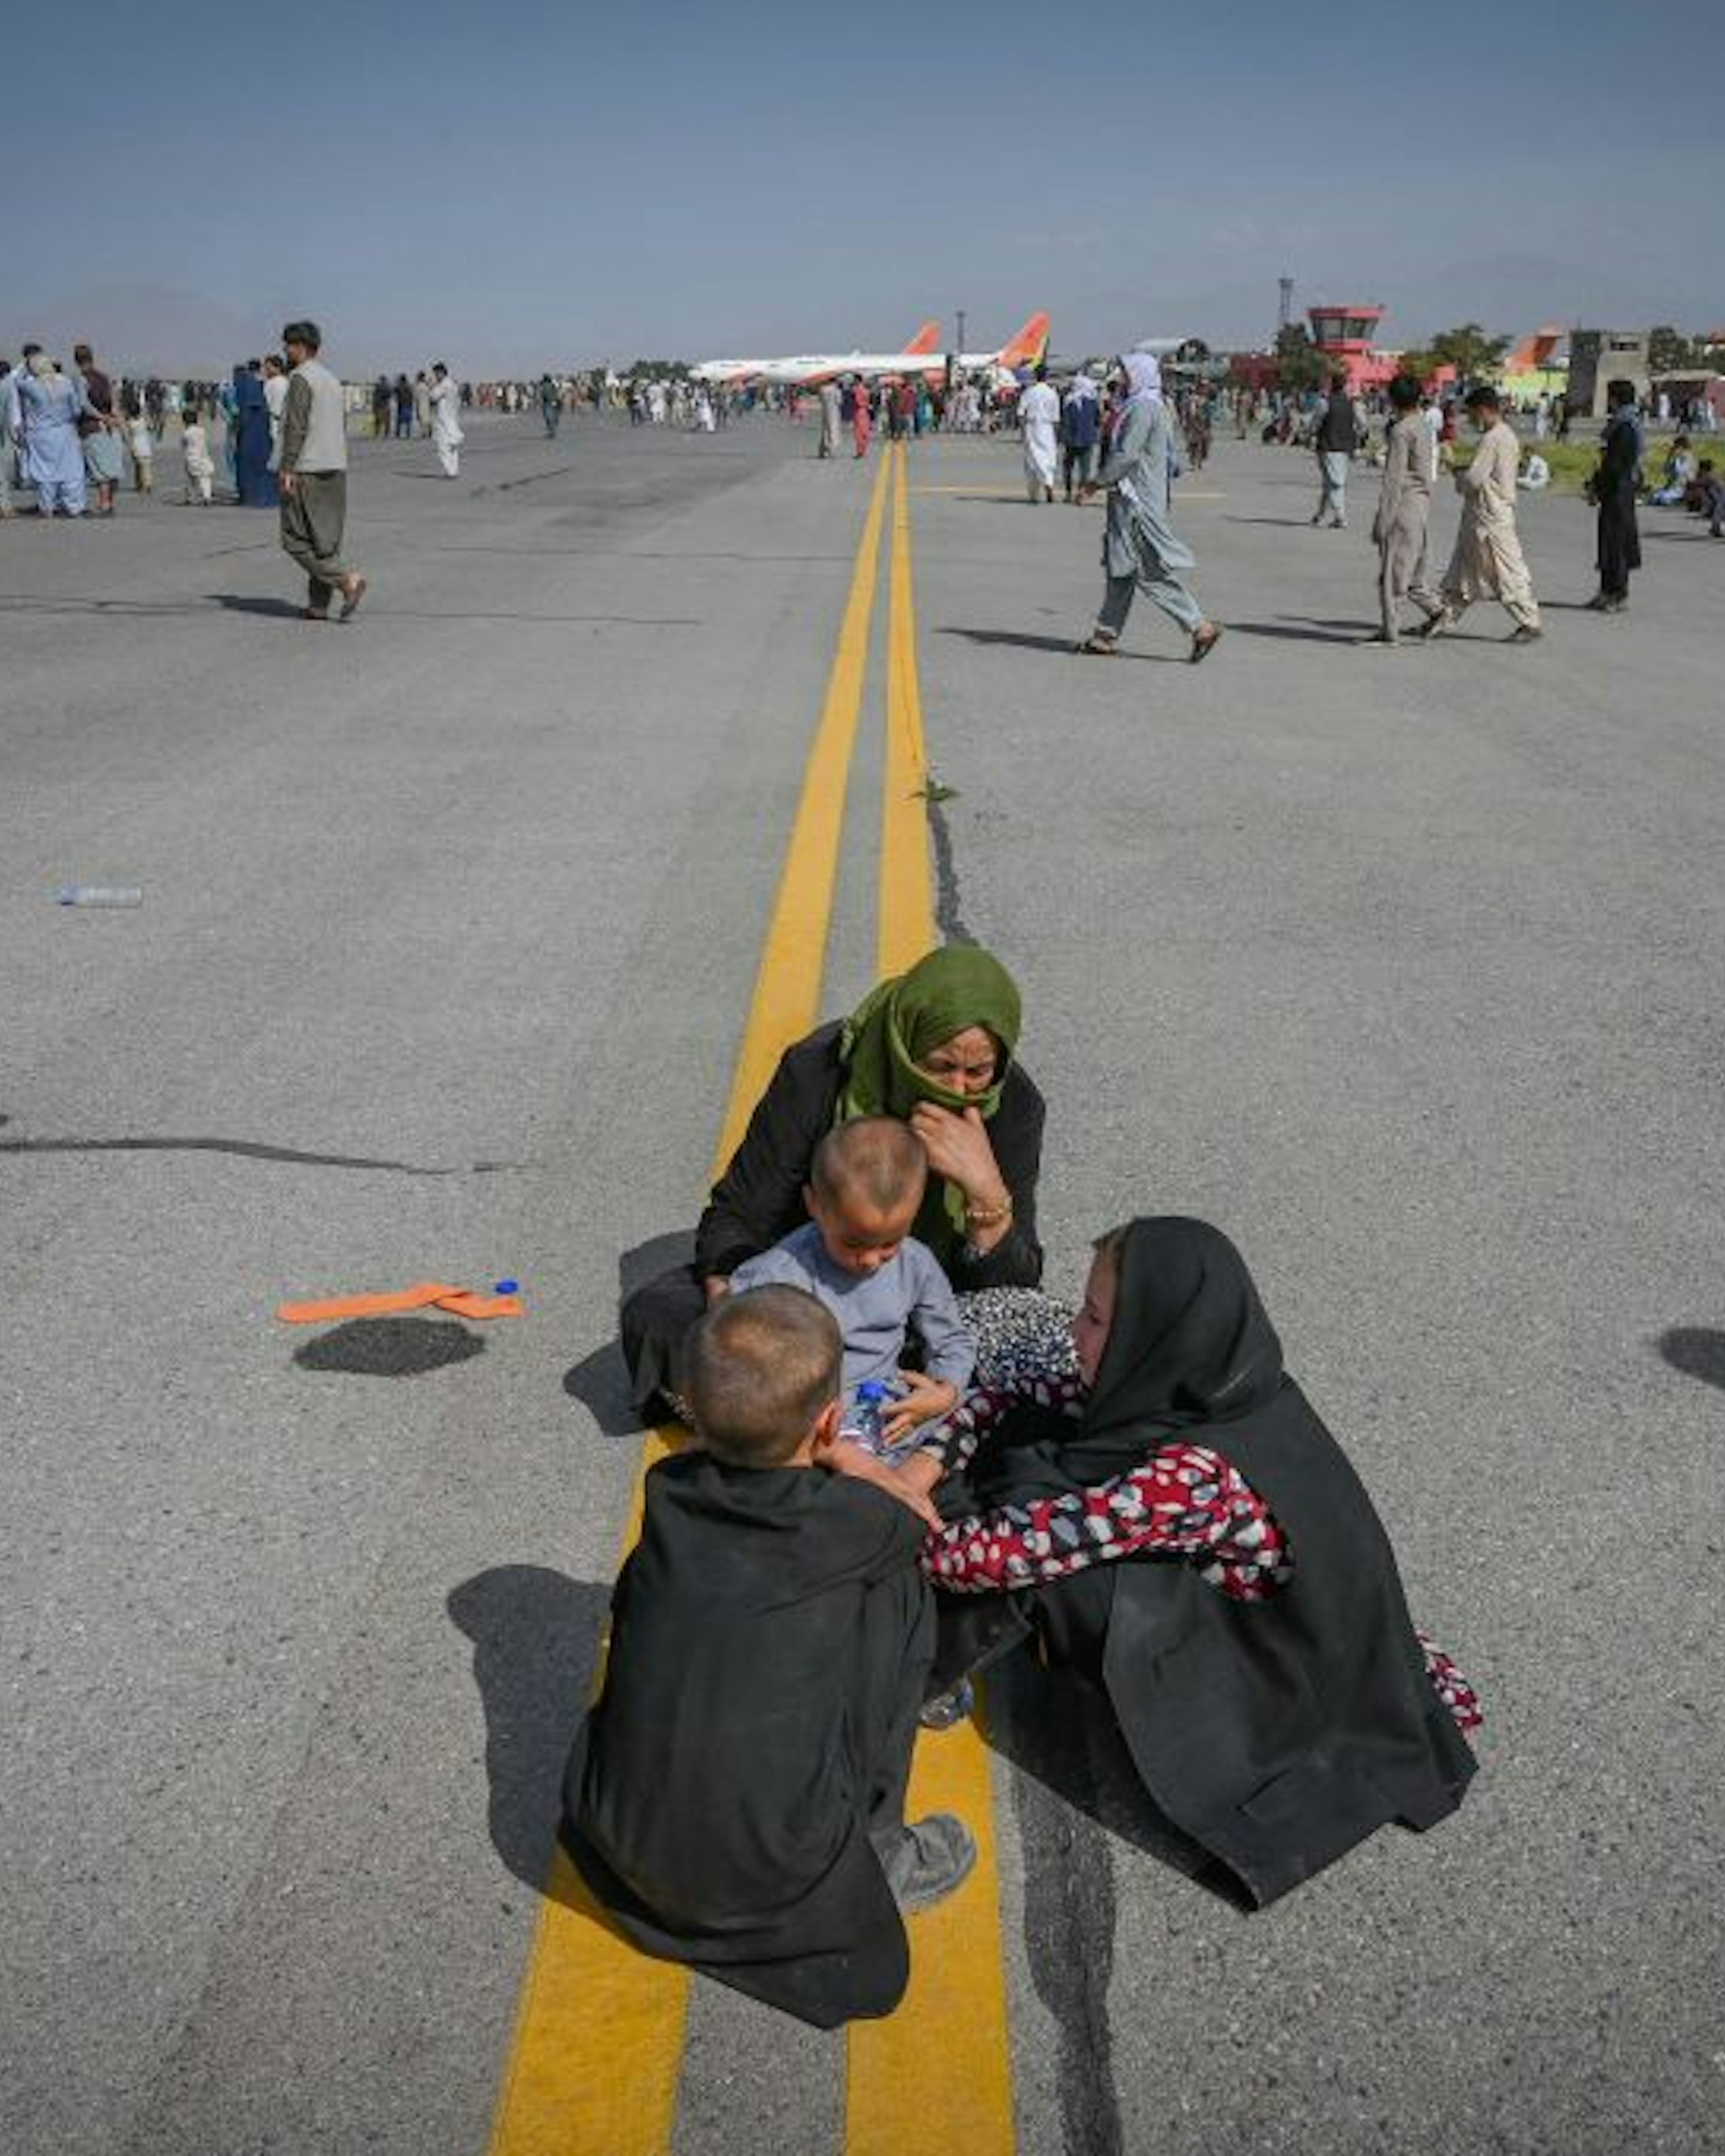 Afghan people sit along the tarmac as they wait to leave the Kabul airport in Kabul on August 16, 2021, after a stunningly swift end to Afghanistan's 20-year war, as thousands of people mobbed the city's airport trying to flee the group's feared hardline brand of Islamist rule.